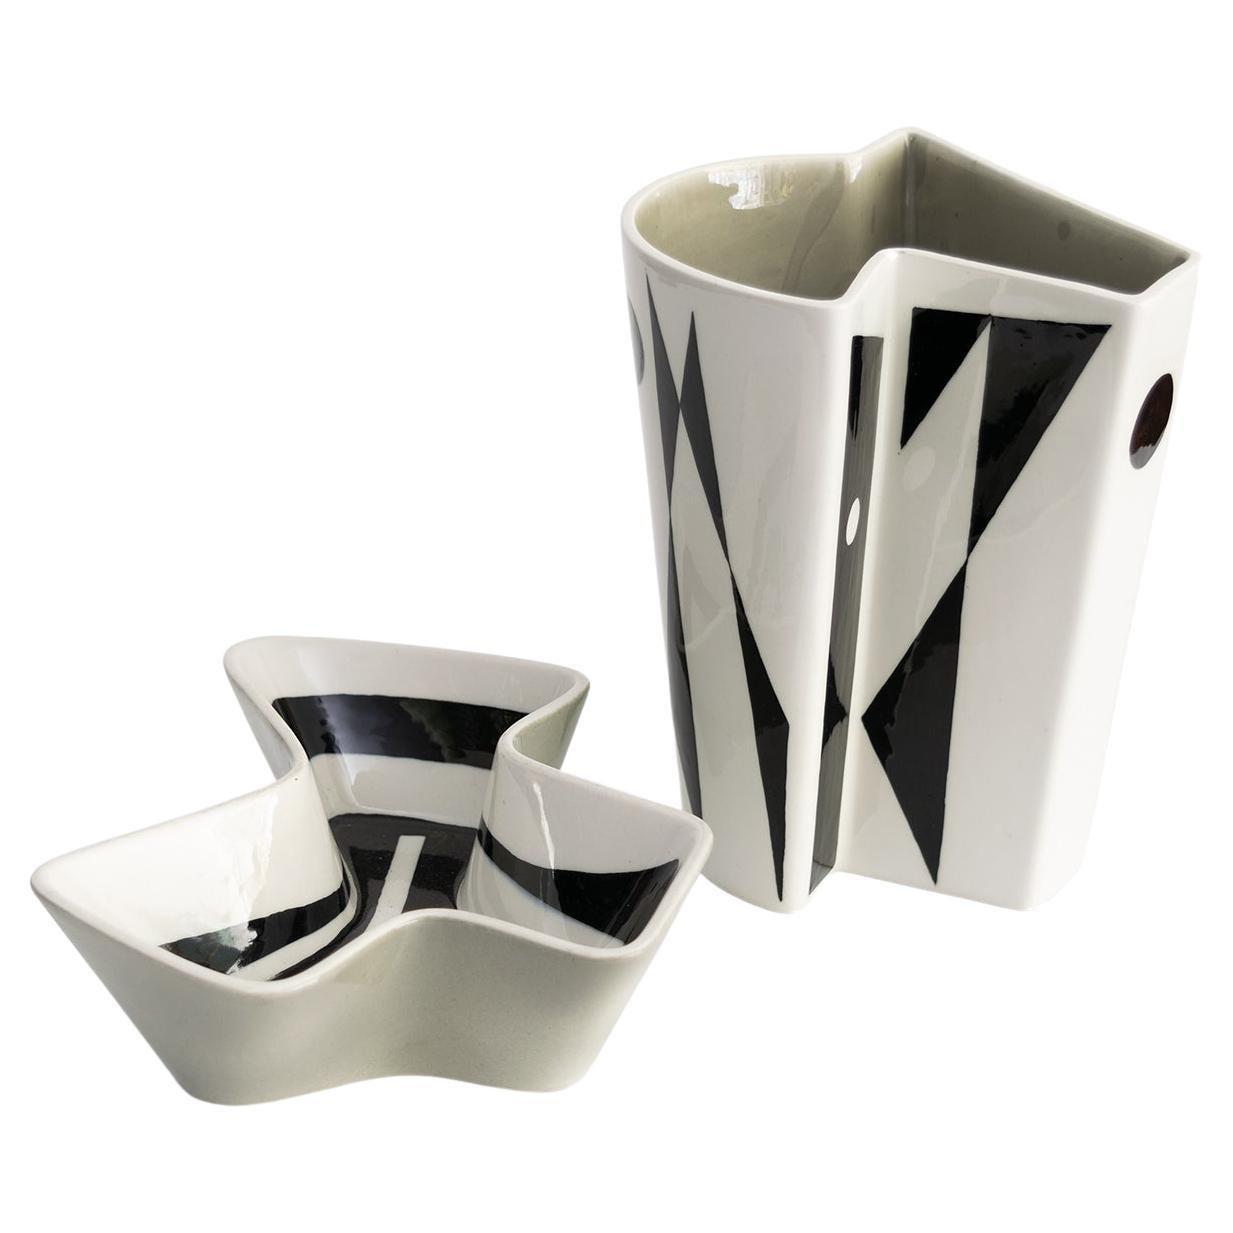 Carl-Harry Stalhane Geometric Bowl and Vase, Rorstrand, Sweden 1950 For Sale